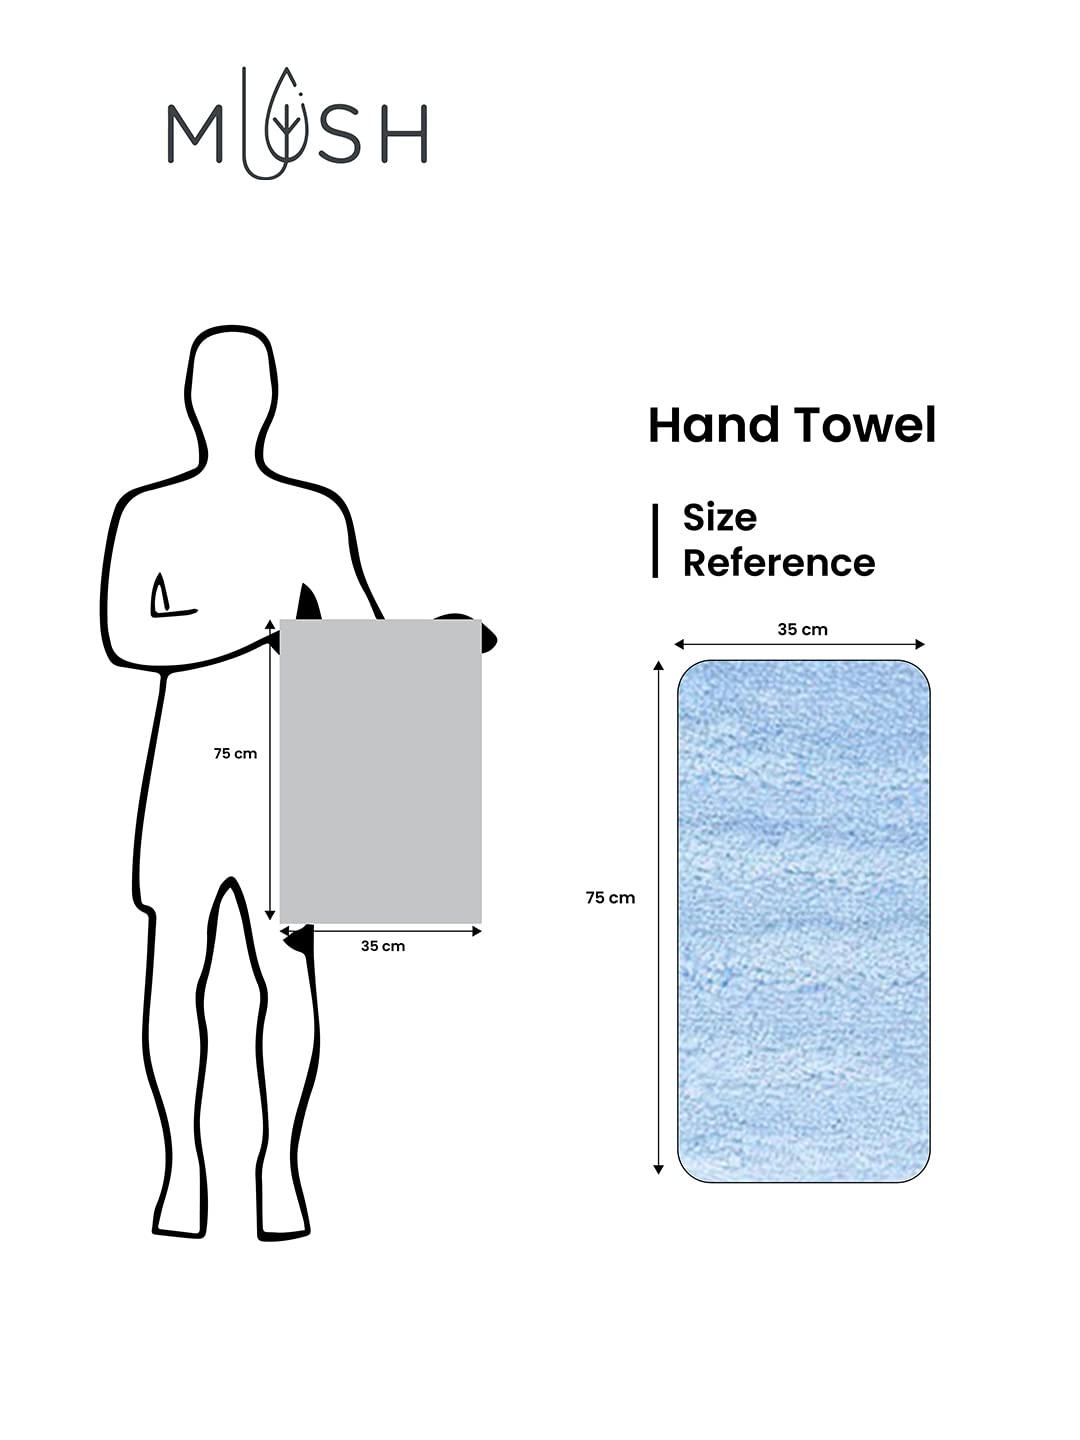 Mush 600 GSM Hand Towel Set of 2 | 100% Bamboo Hand Towel |Ultra Soft, Absorbent & Quick Dry Towel for Gym, Pool, Travel, Spa and Yoga | 29.5 x 14 Inches (Grey & White)